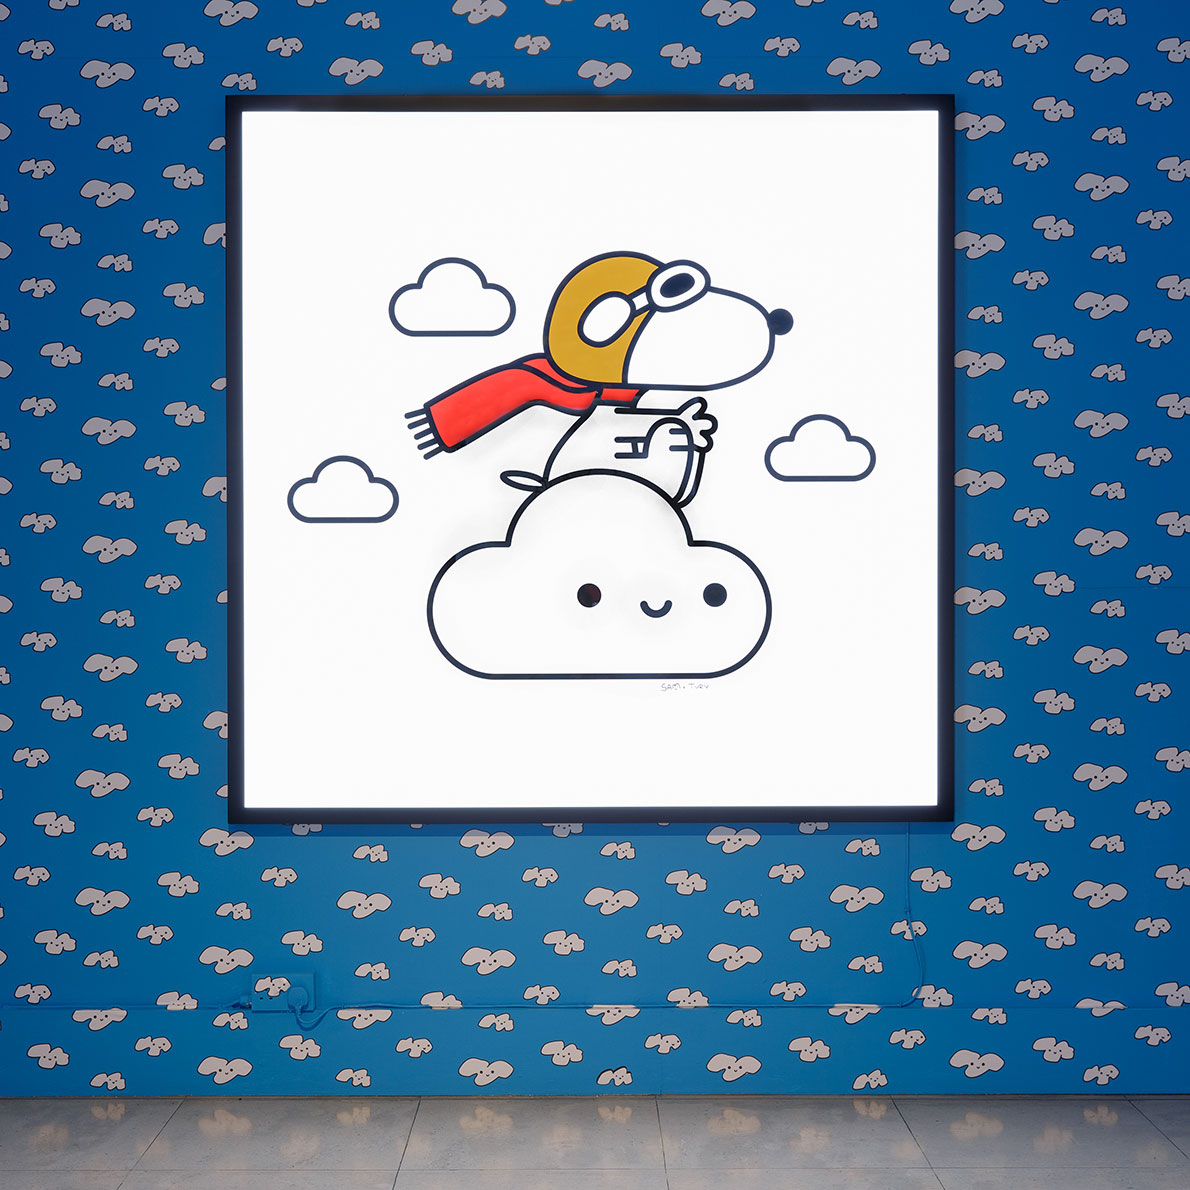 An illustration of a black and white dog on top of a white cloud hanging on a blue wall.